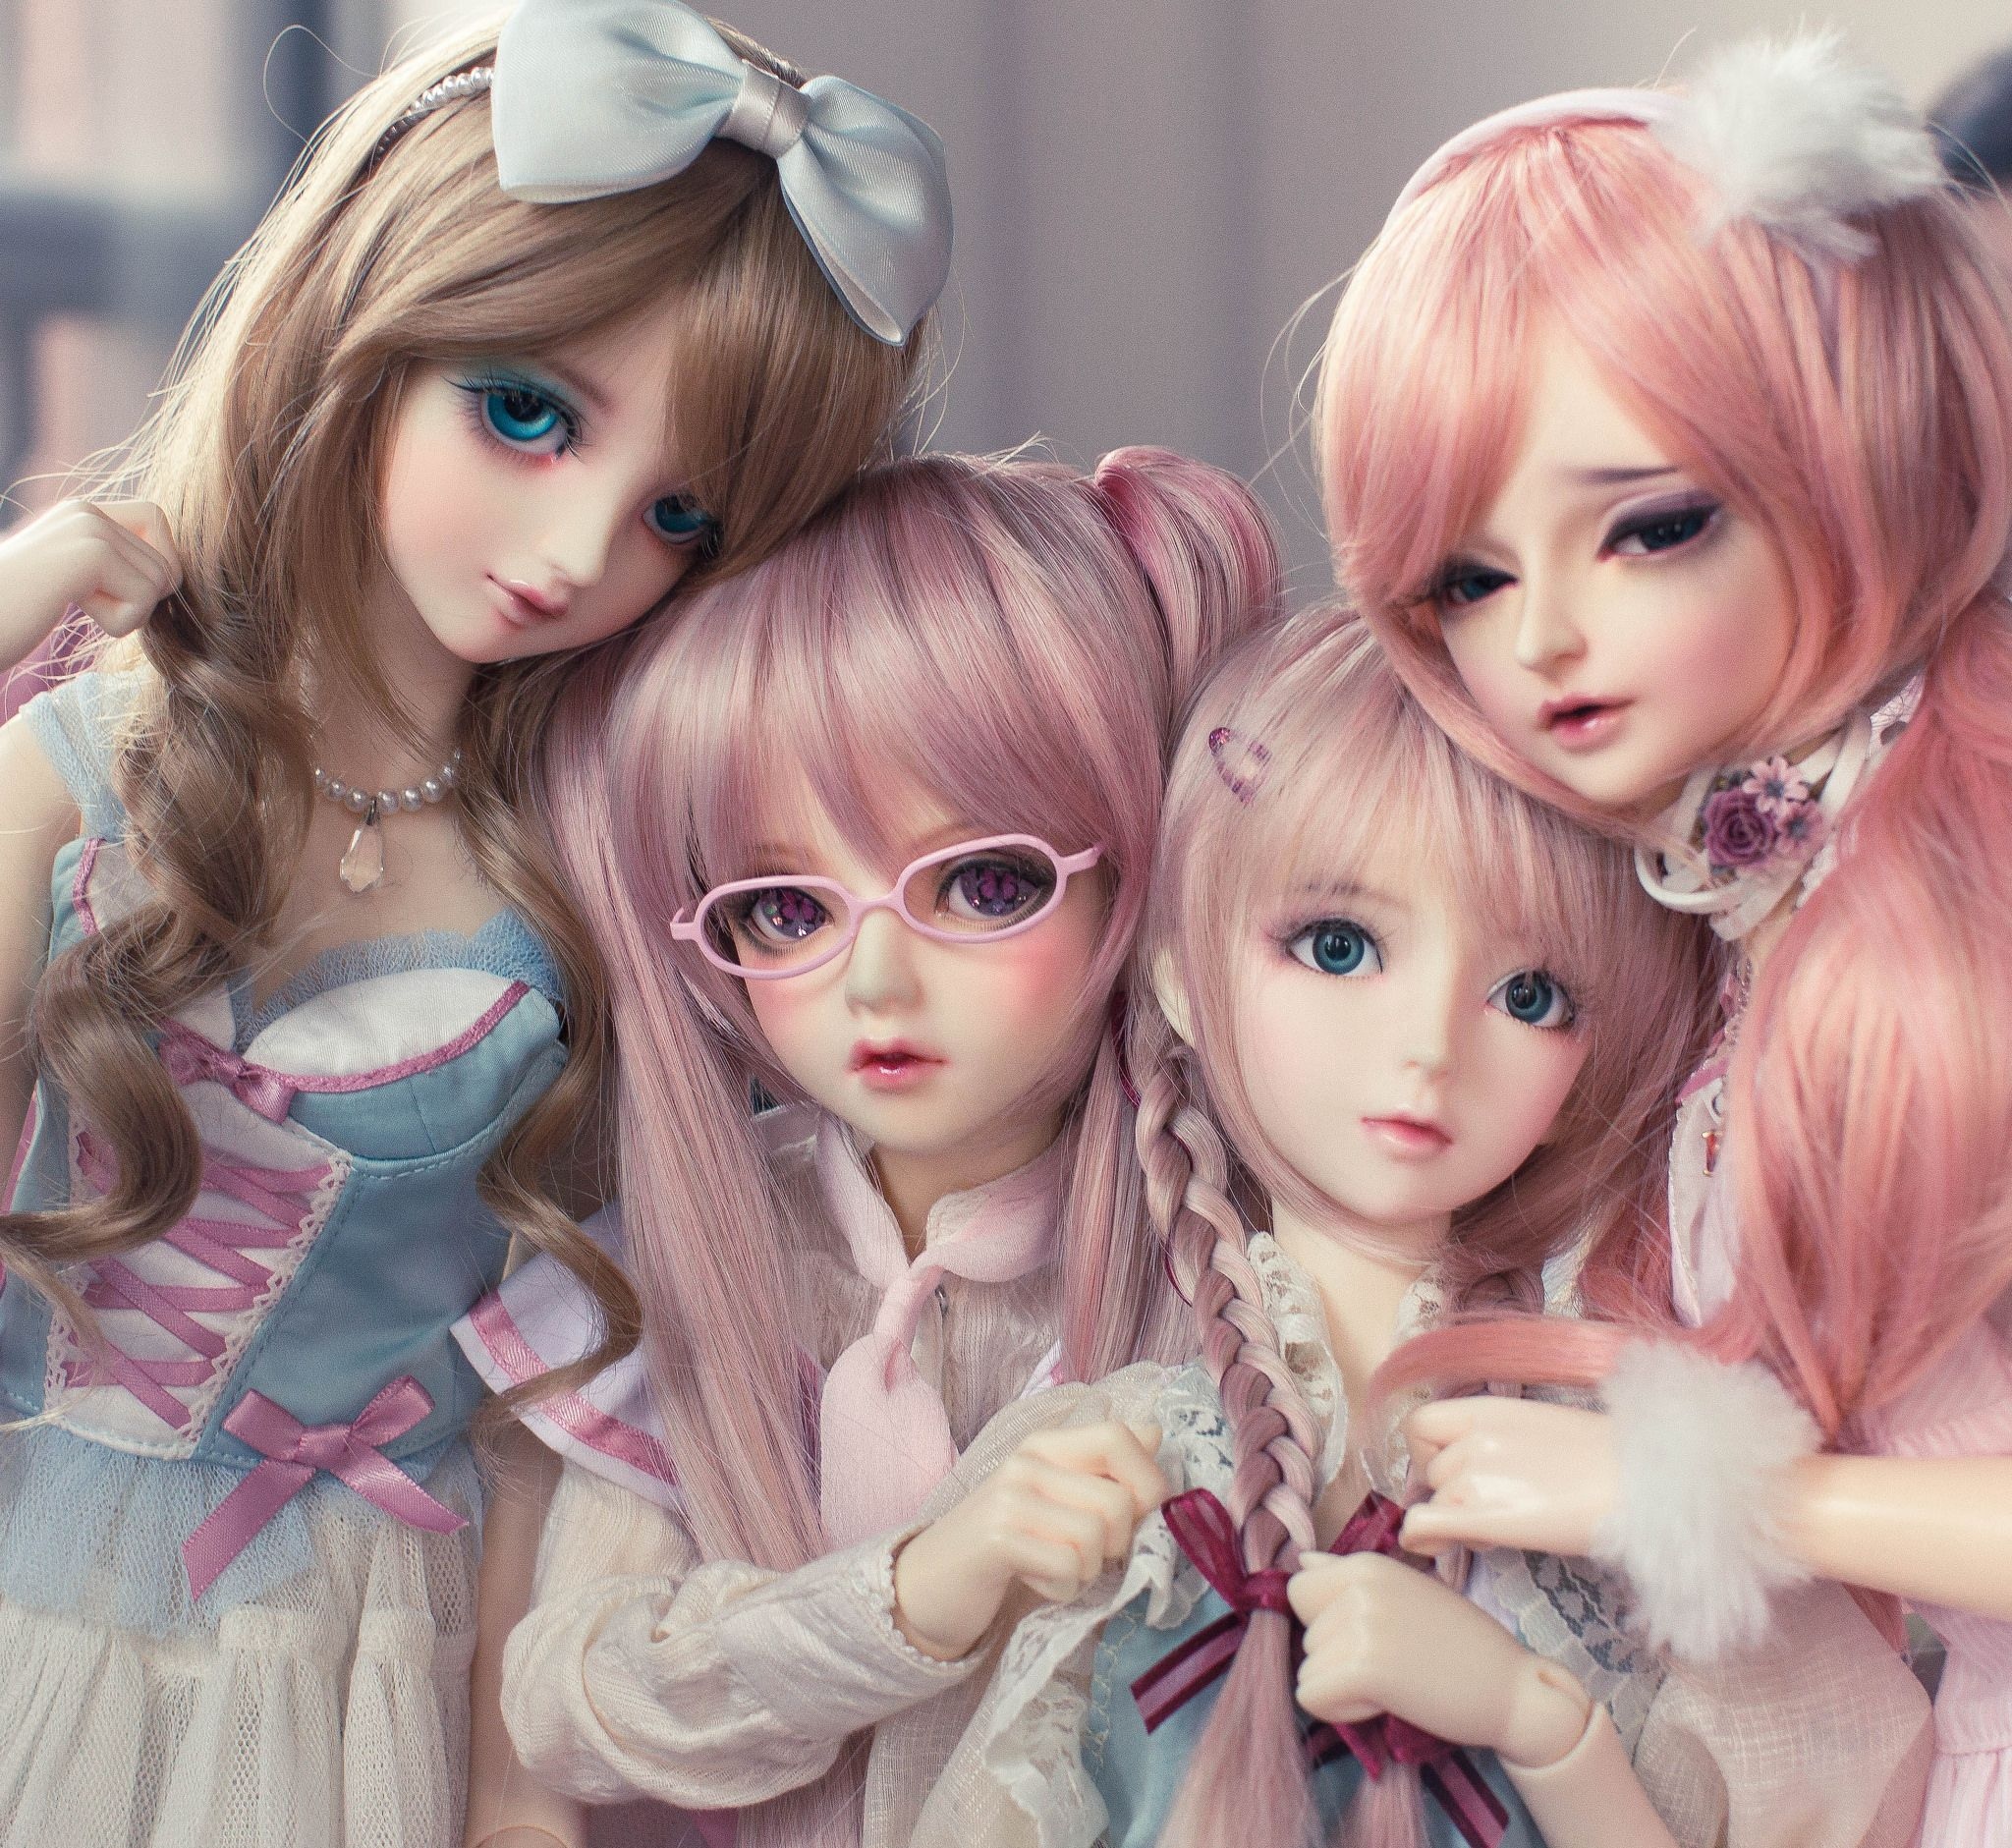 Cute dolls wallpapers download